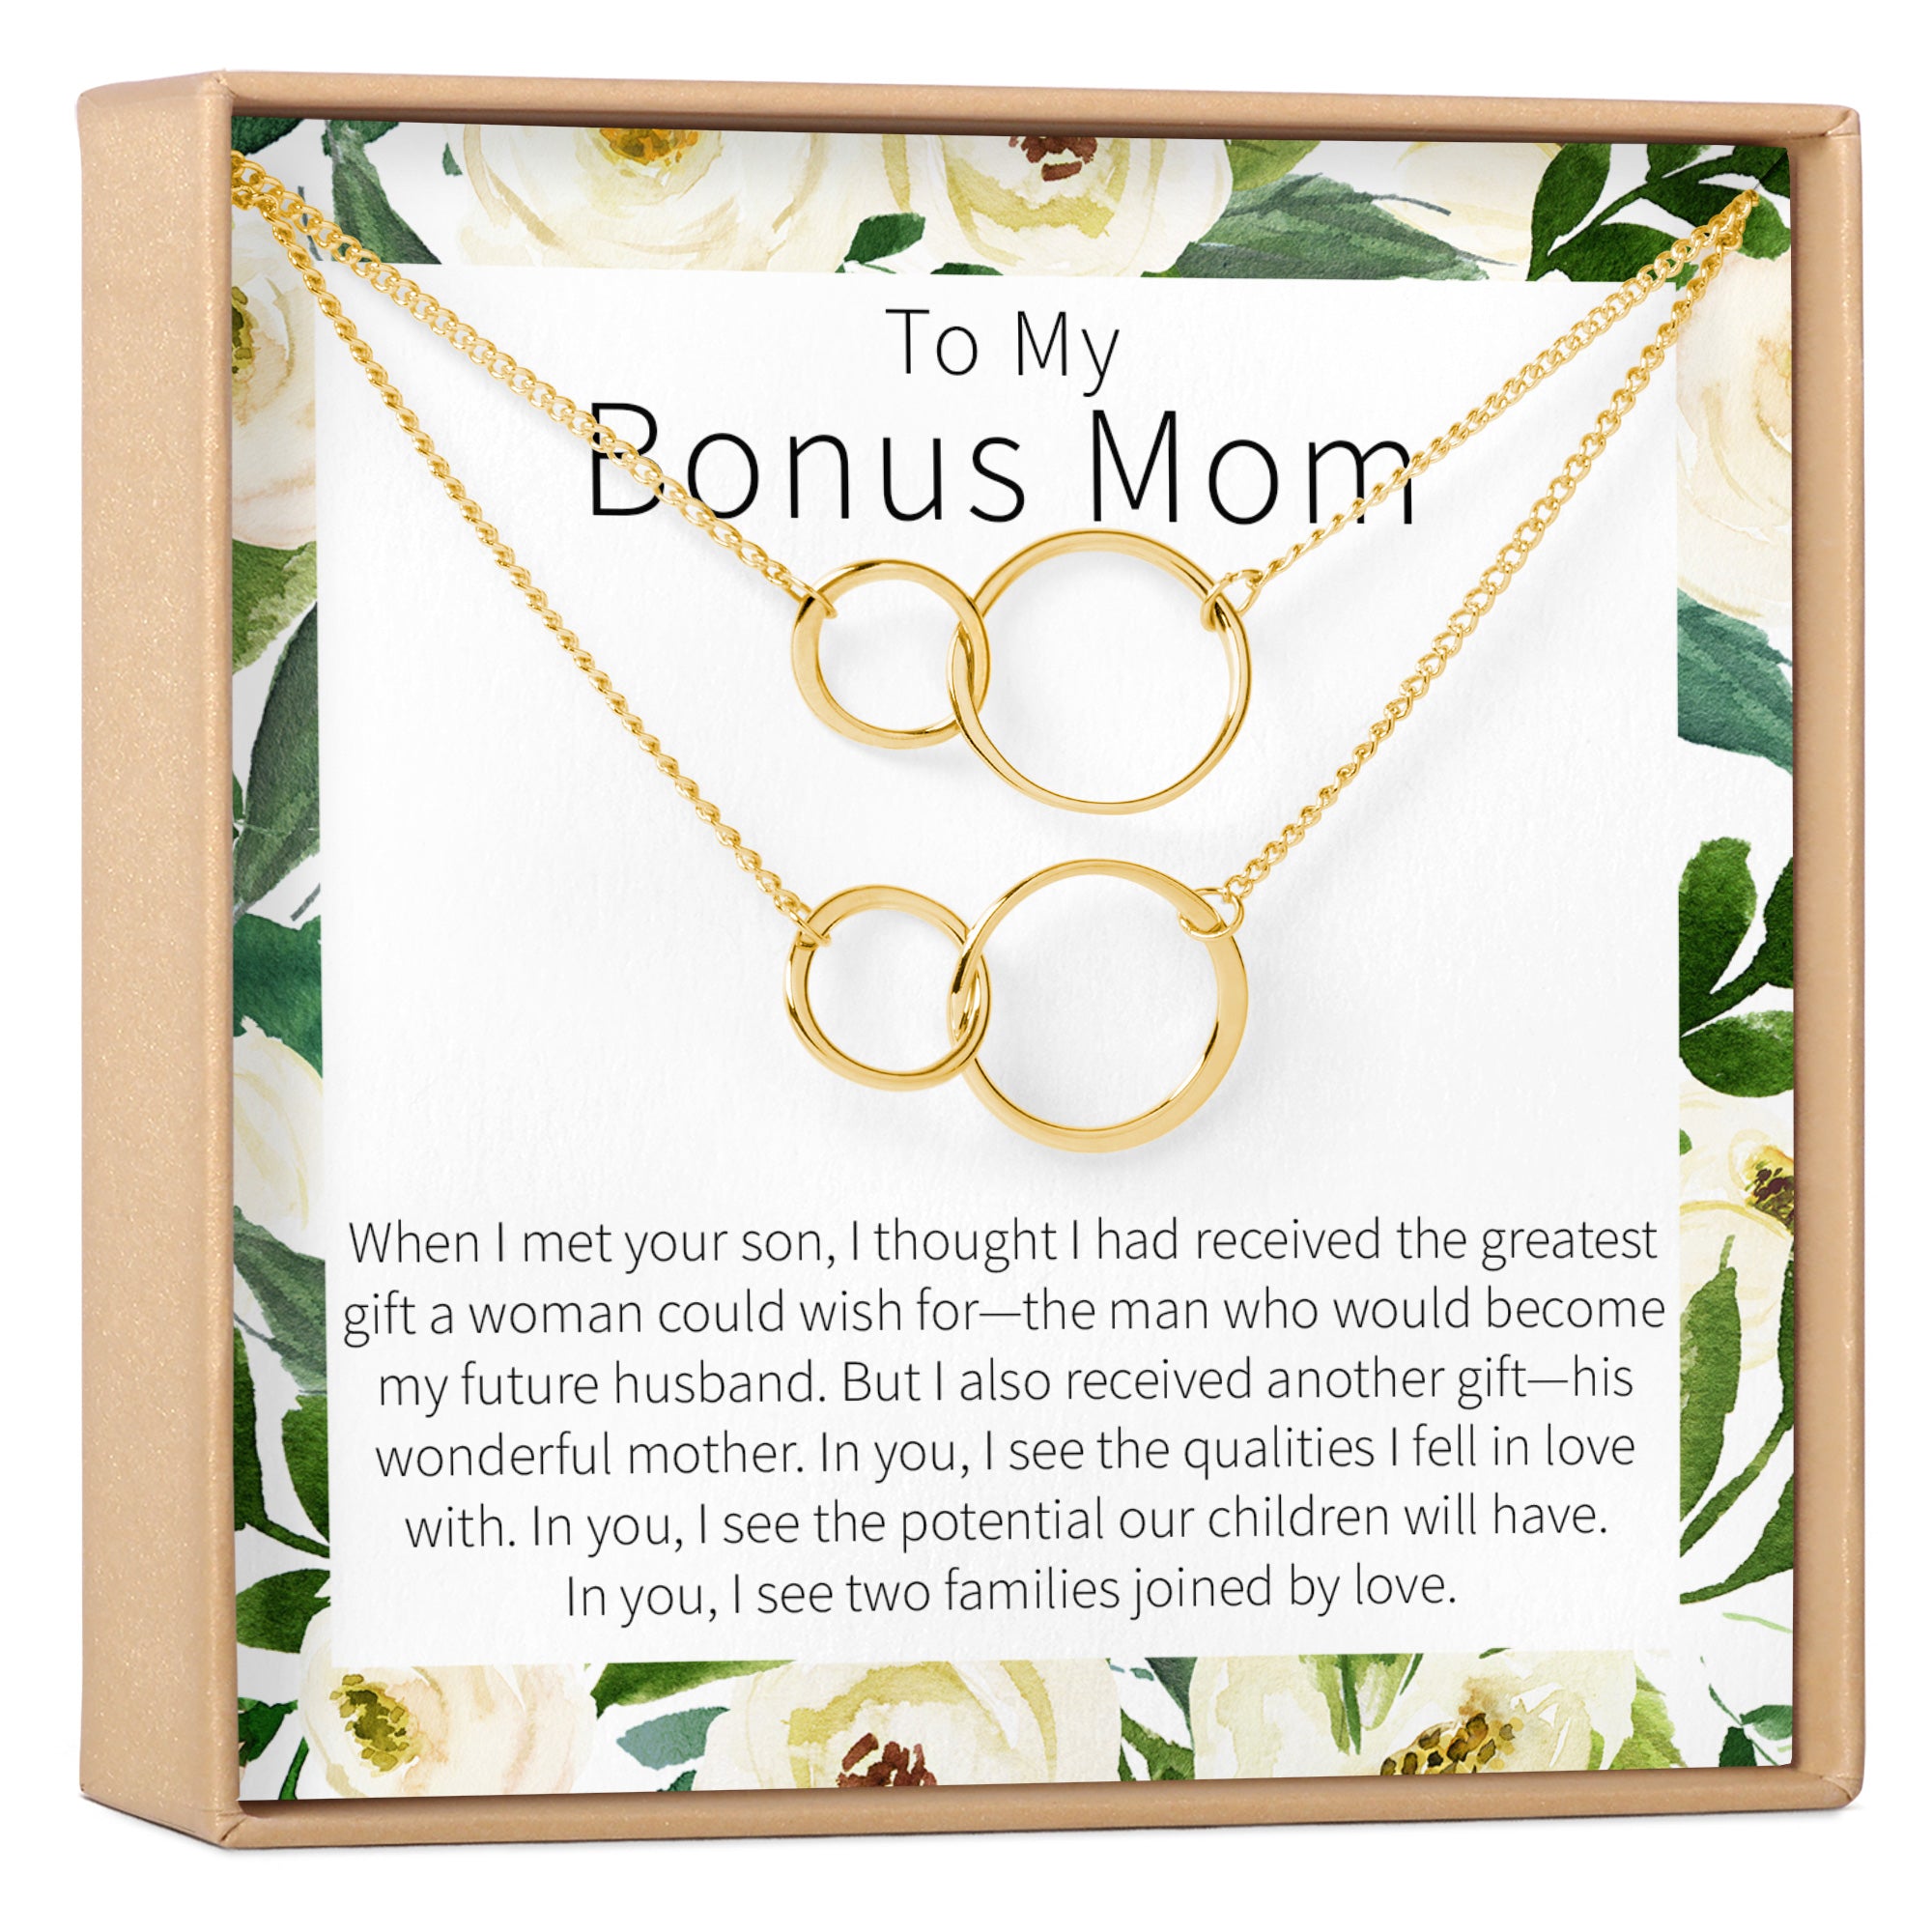 Bonus Mom Gifts From Daughter Son Husband Best Mom Ever Gifts